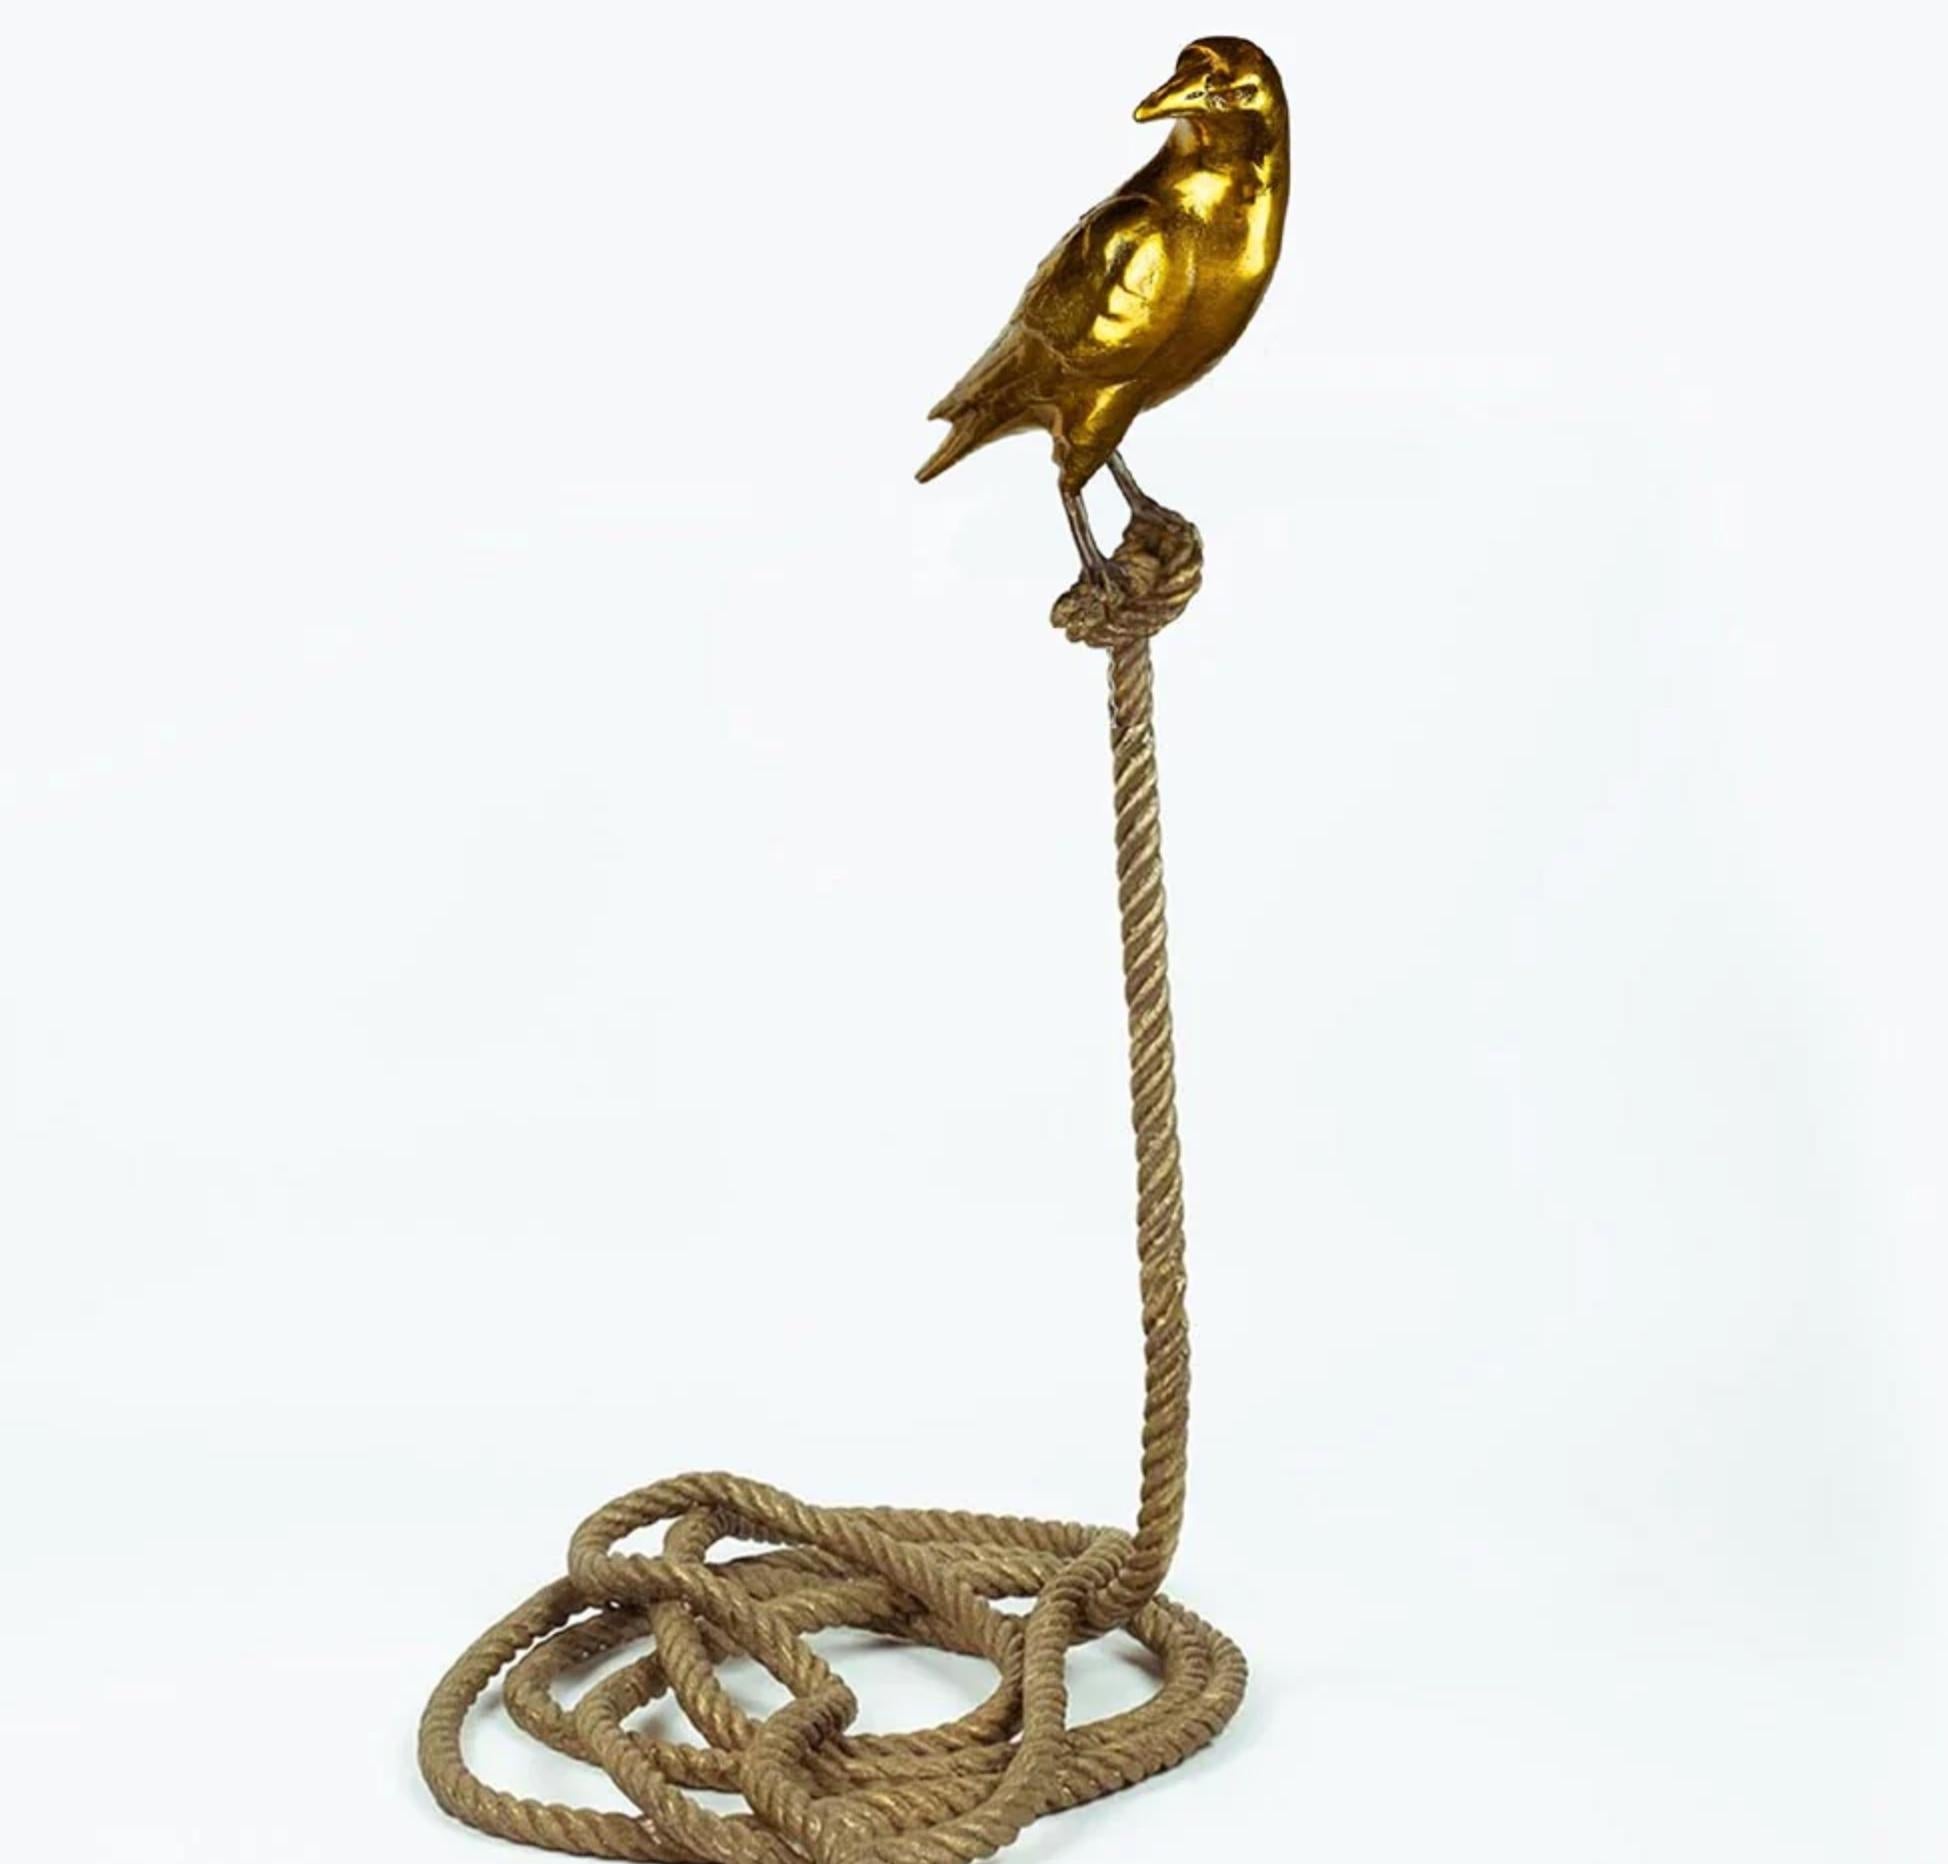 Gillie and Marc Schattner Figurative Sculpture - Authentic Bronze Simon, the magpie on short rope Sculpture by Gillie and Marc